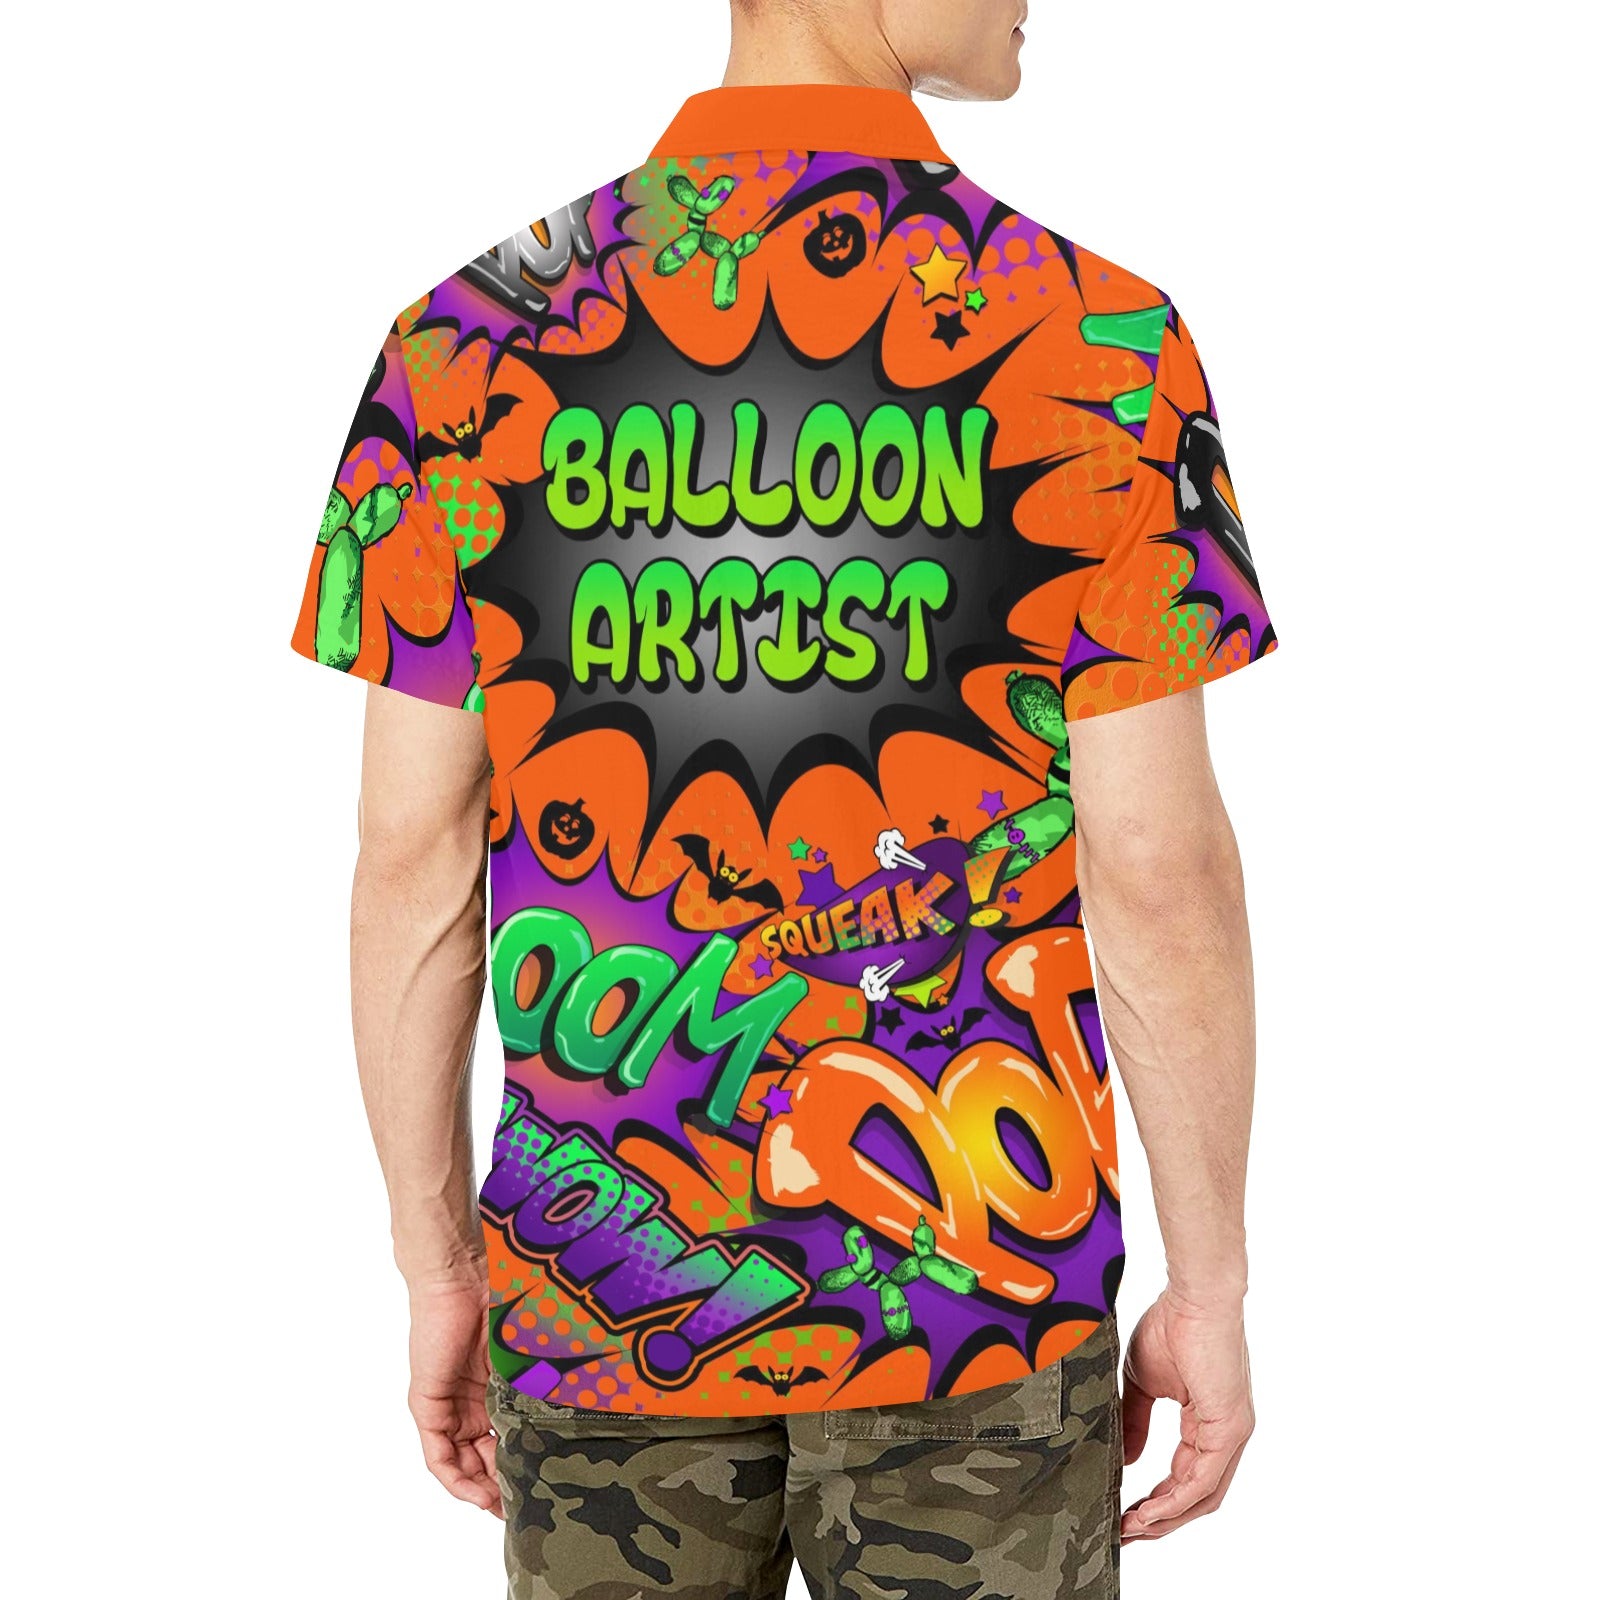 Halloween shirt for balloon artists and entertainers